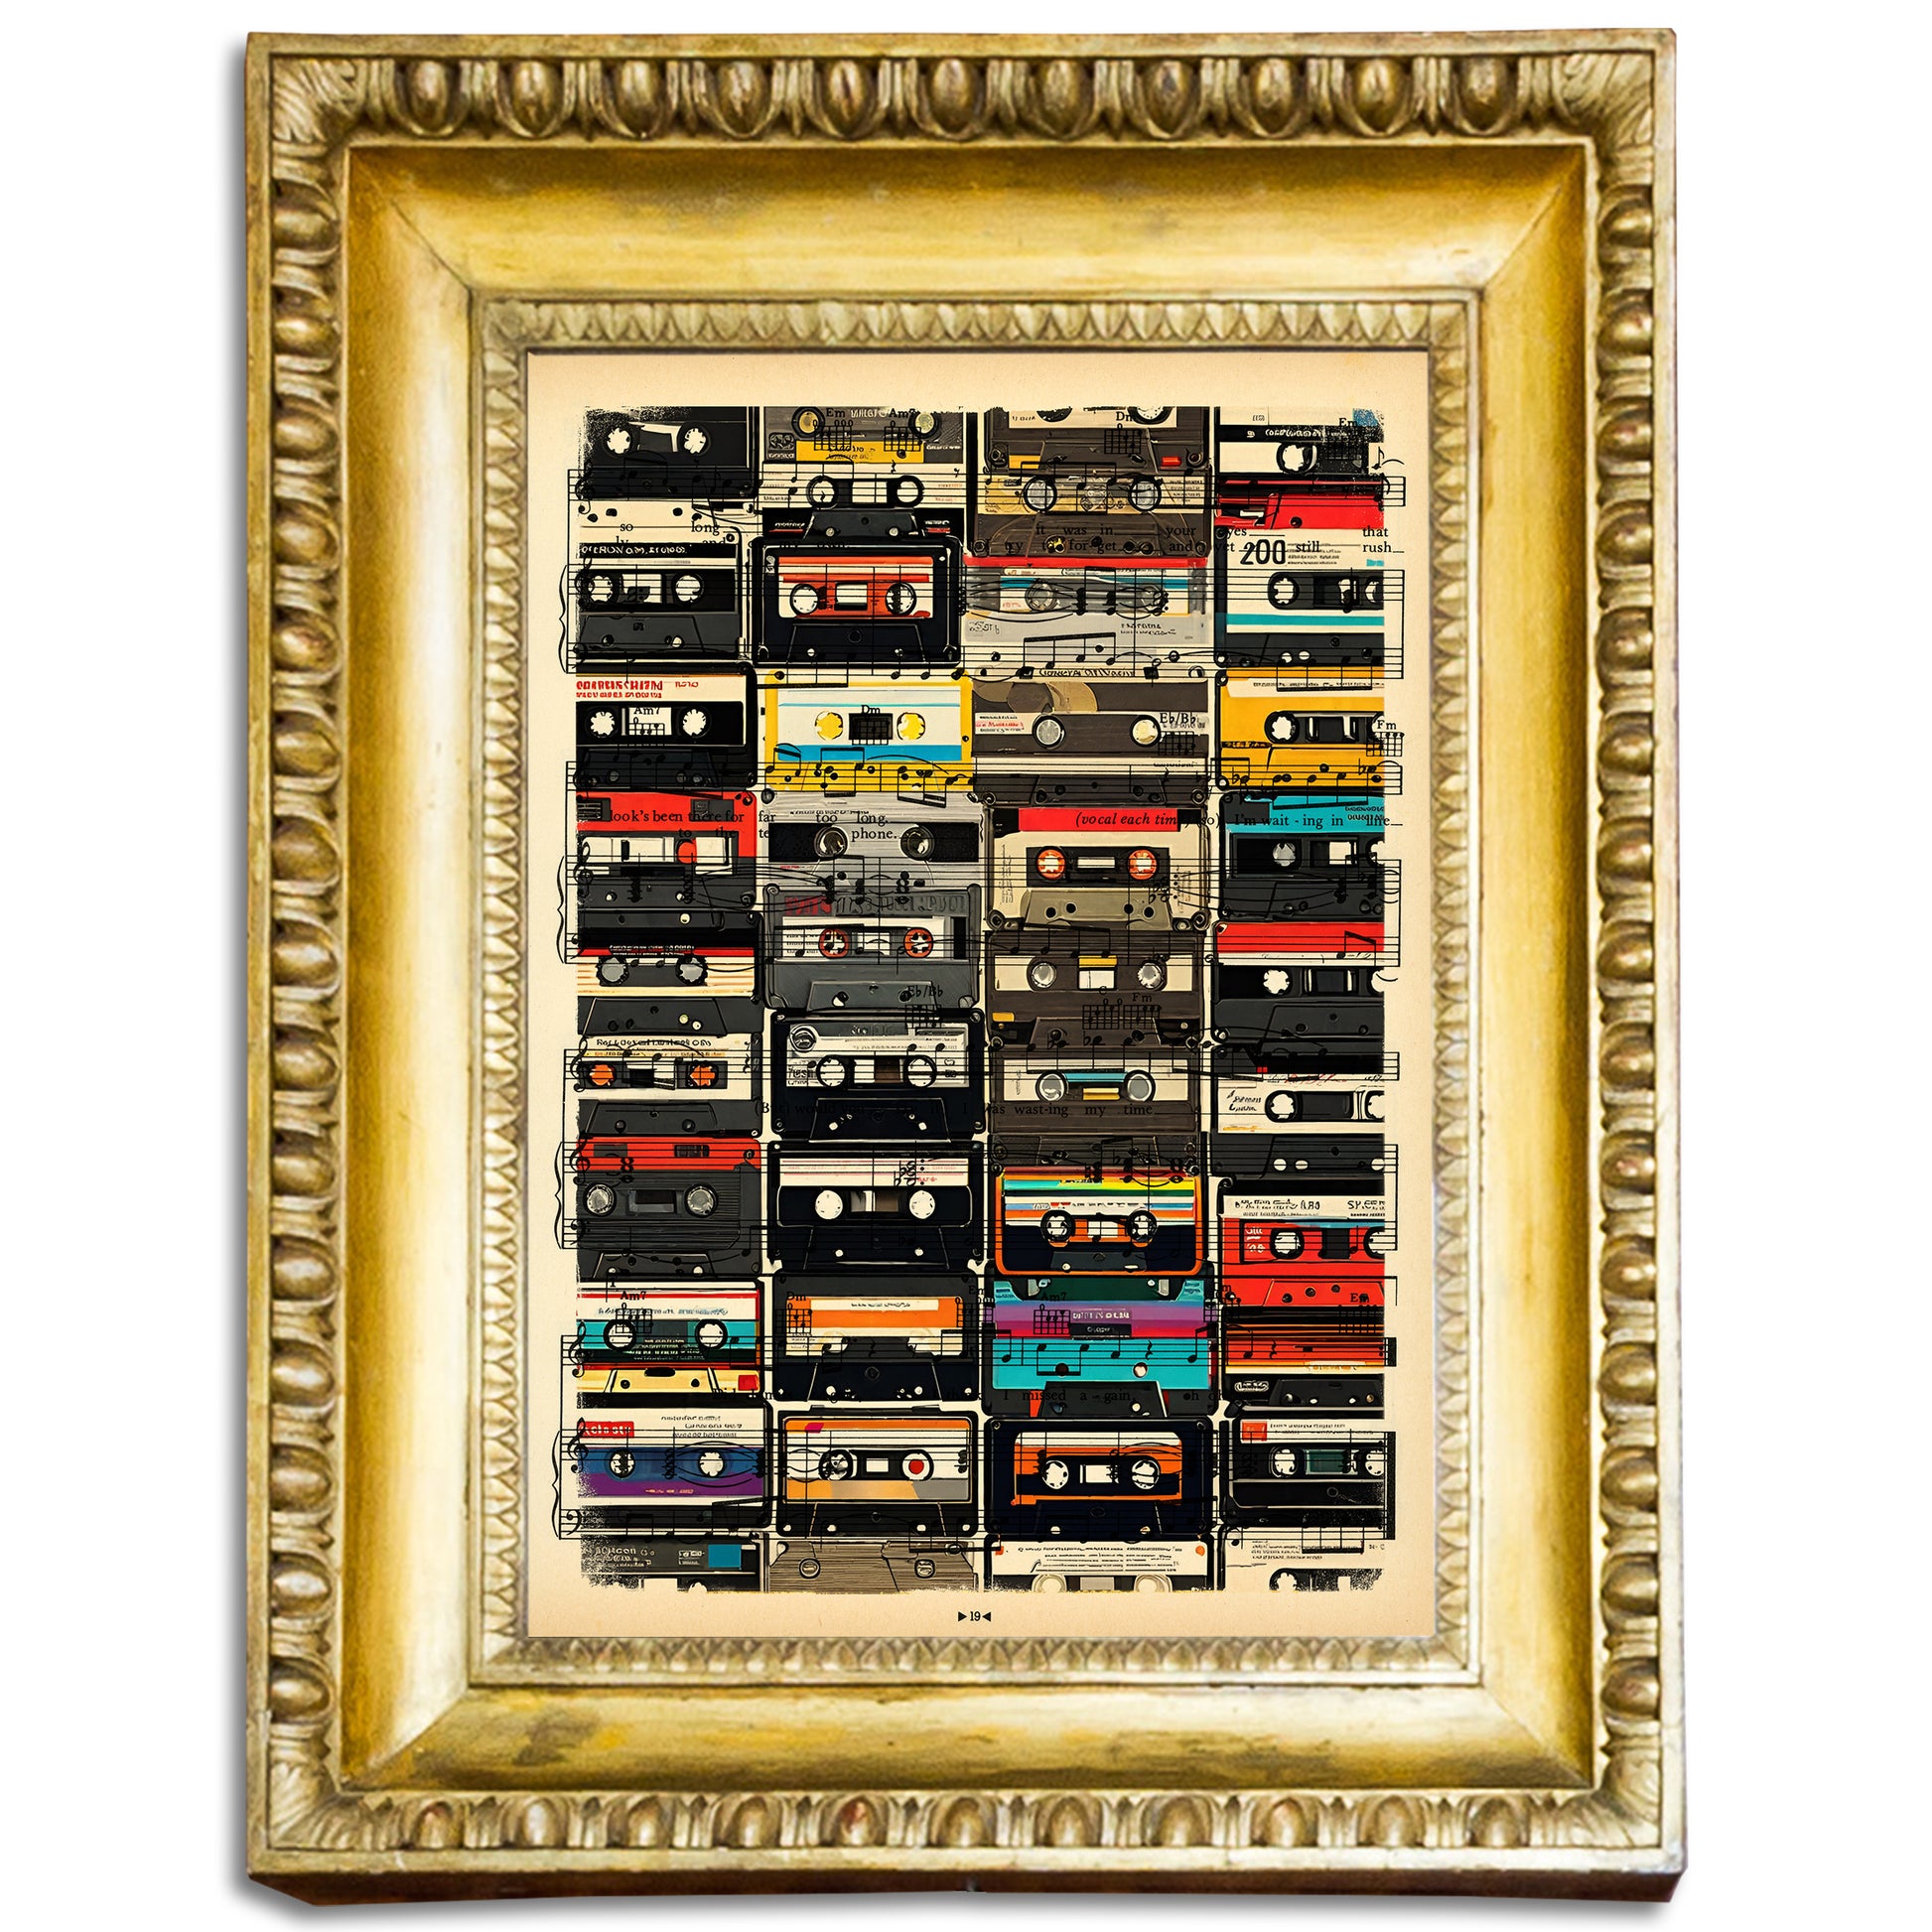 "HiFi Retro Tape Cassette Wall" digital art print on vintage music book page featuring cassette tapes.